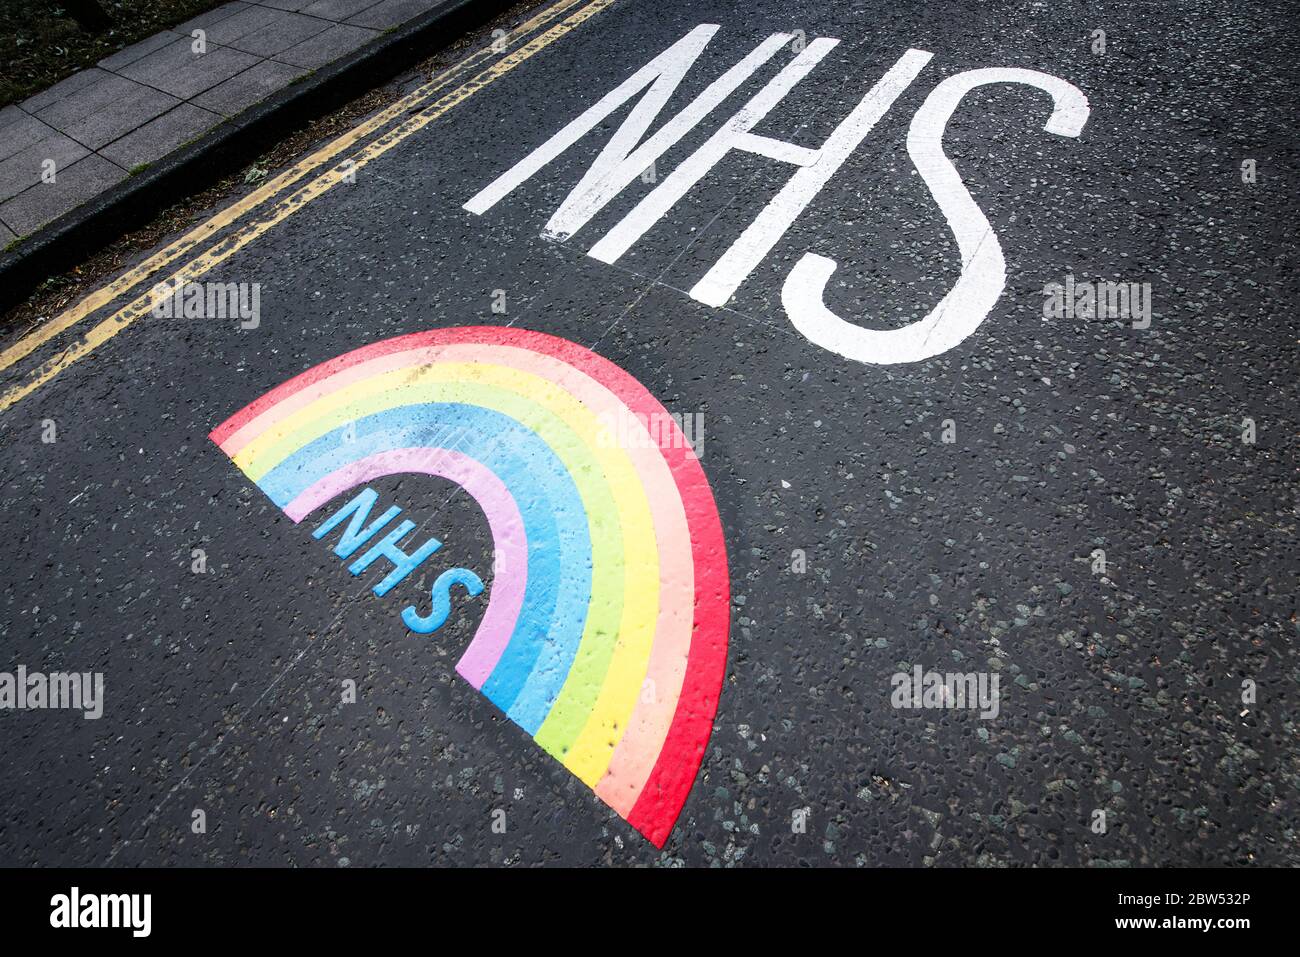 Newly painted road markings Thank you NHS and a rainbow have been painted outside a medical centre in Manchester to thank all the front line NHS staff. Stock Photo